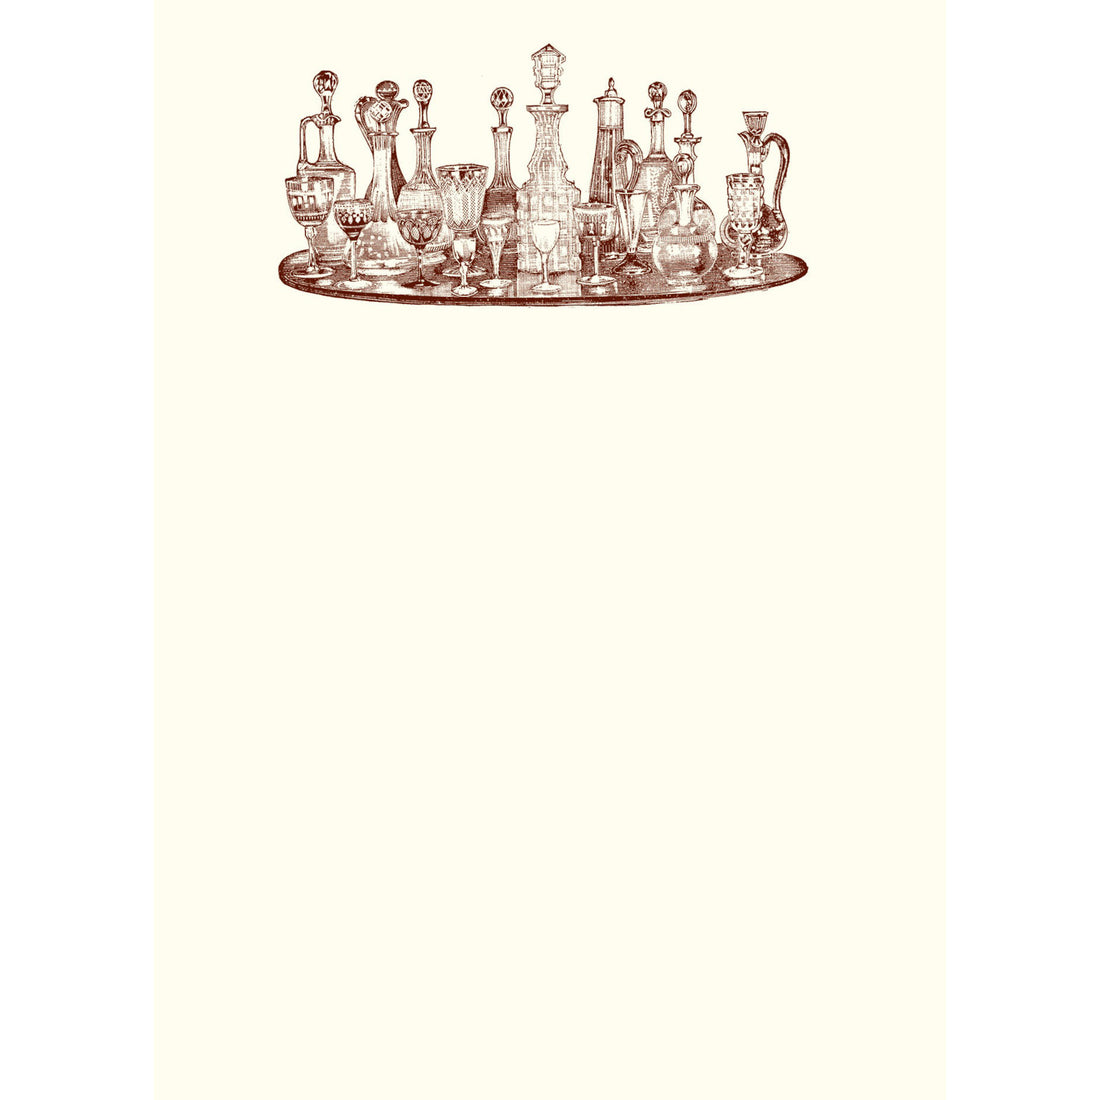 An illustration of a collection of various vintage bottles and glassware on a tray, created by Alexa Pulitzer for the Cocktails Anyone? Set of 10 Notecards.